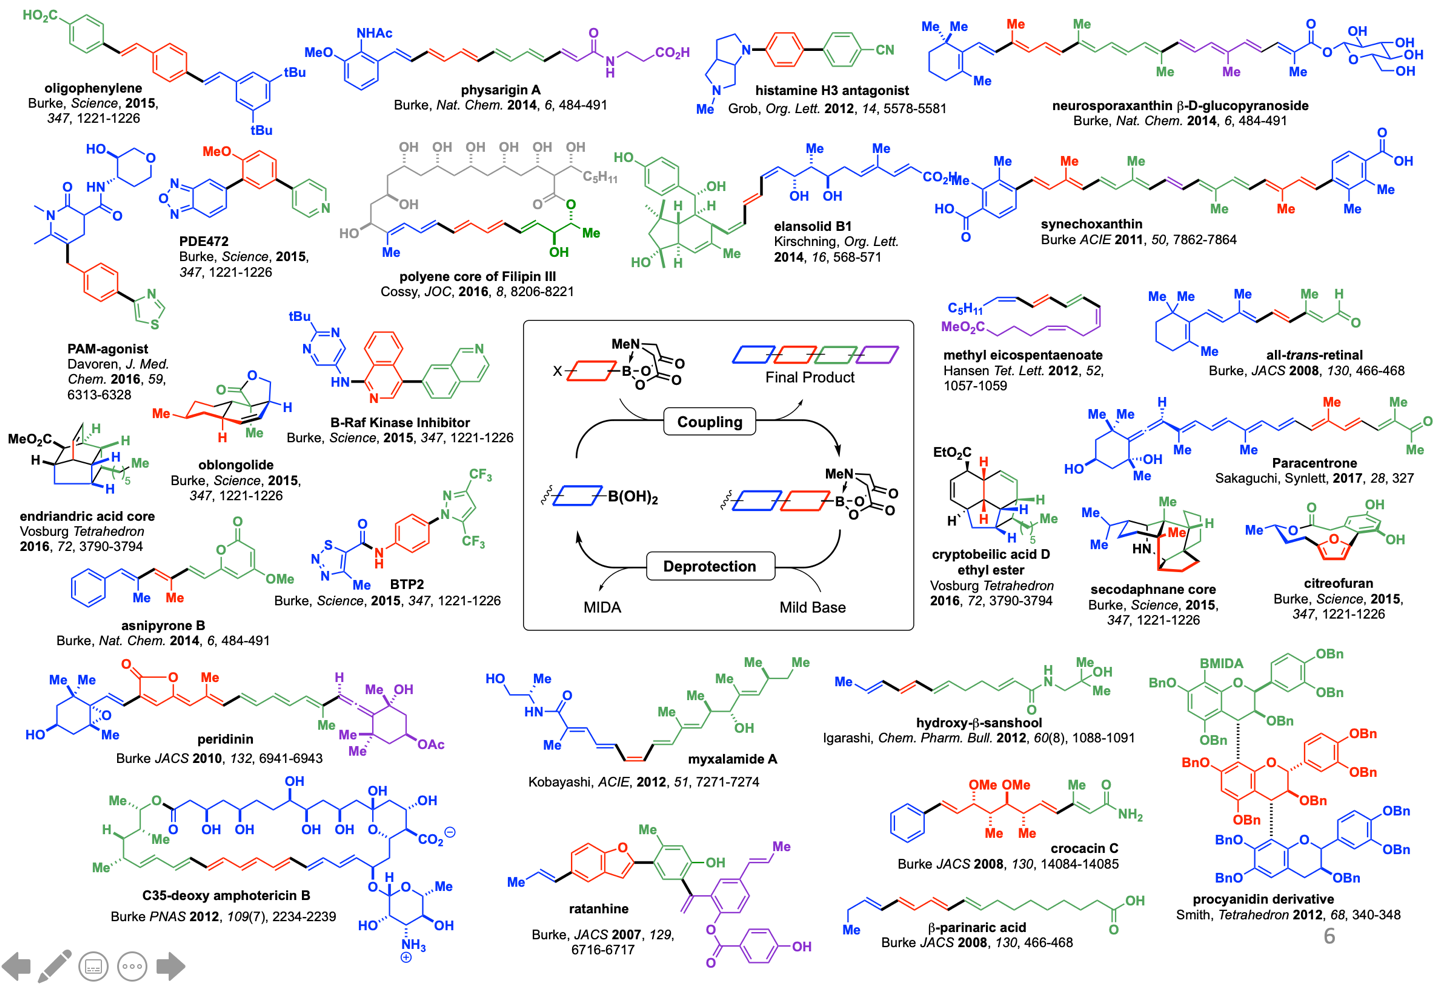 Small molecules synthesized via iterative cross-coupling